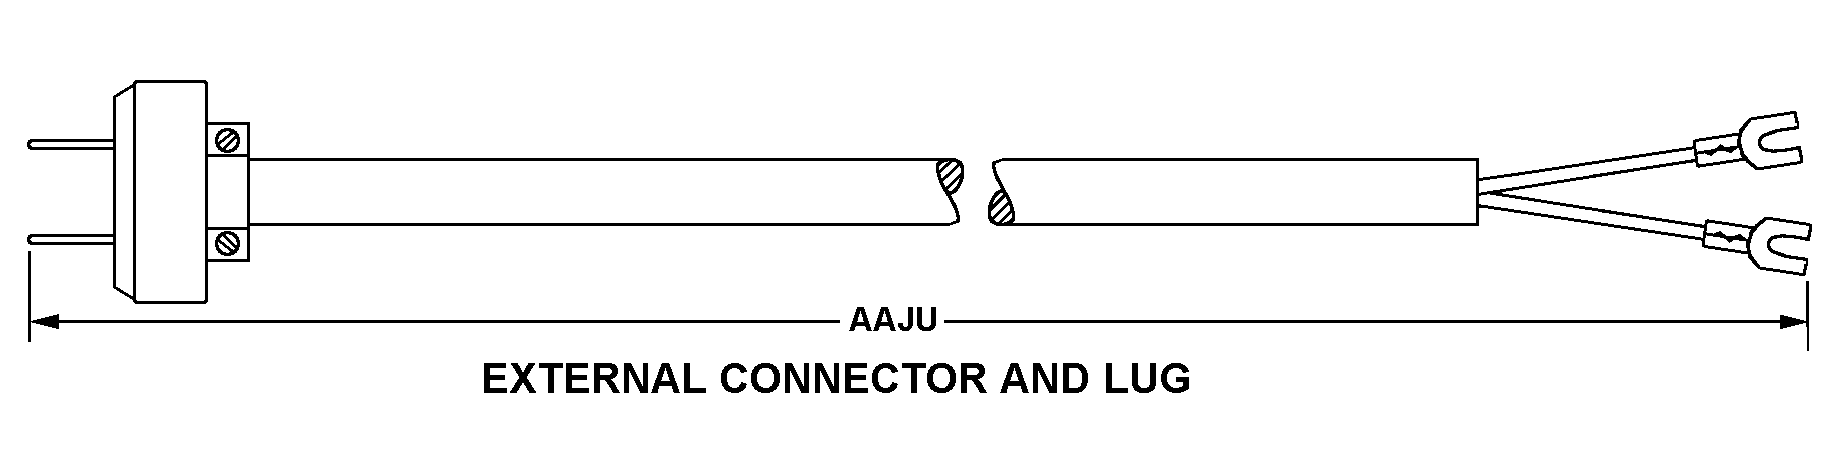 EXTERNAL CONNECTOR AND LUG style nsn 6150-01-263-5191